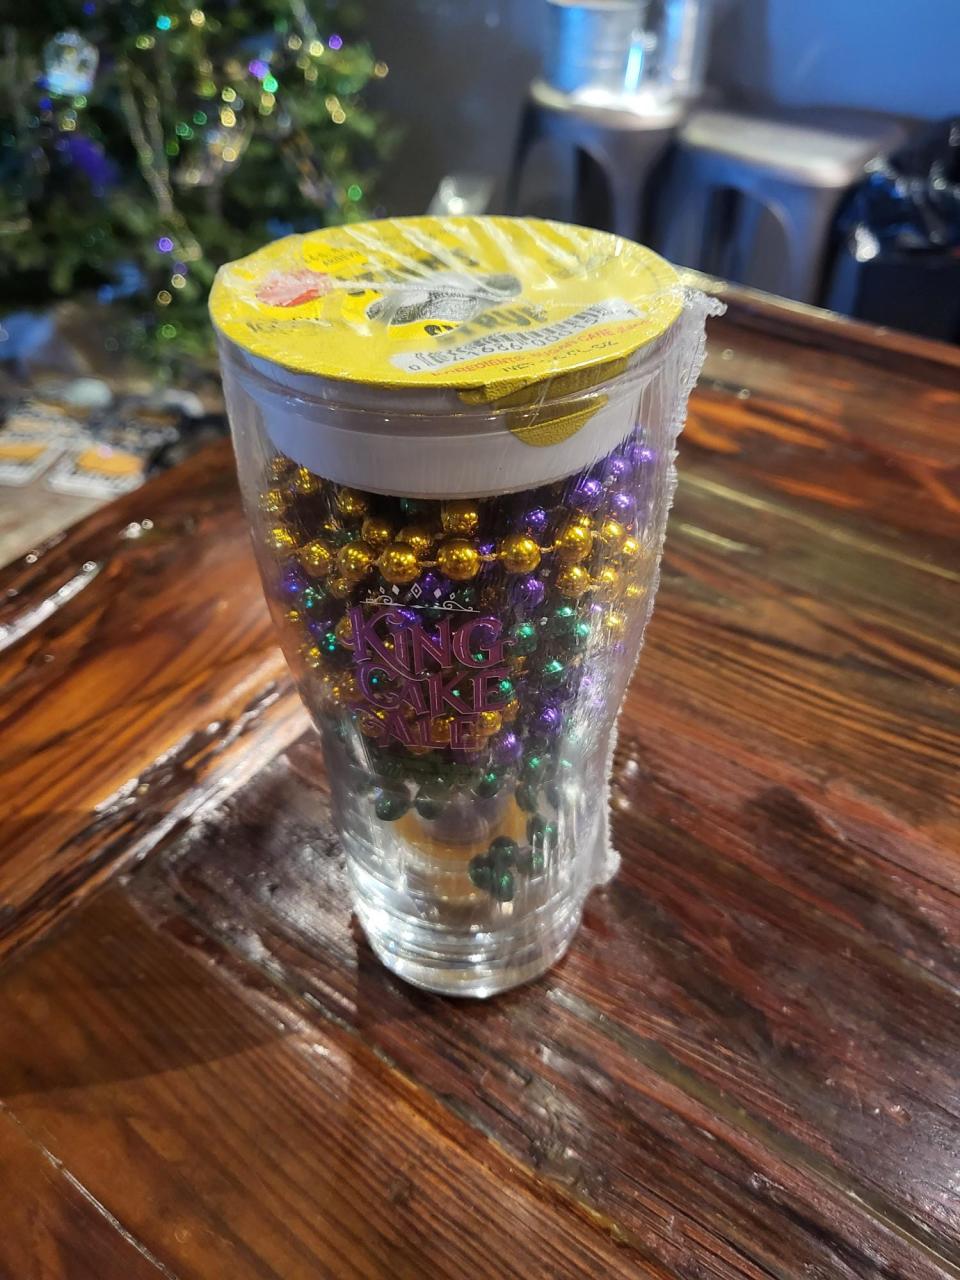 Mudbug Brewery's King Cake Ale rimming kit. Brewmaster Wade Dugas is working on getting these produced and ready for this year's Mardi Gras parade season. The kit comes with syrup, three colors of sugar, beads and a king cake baby.